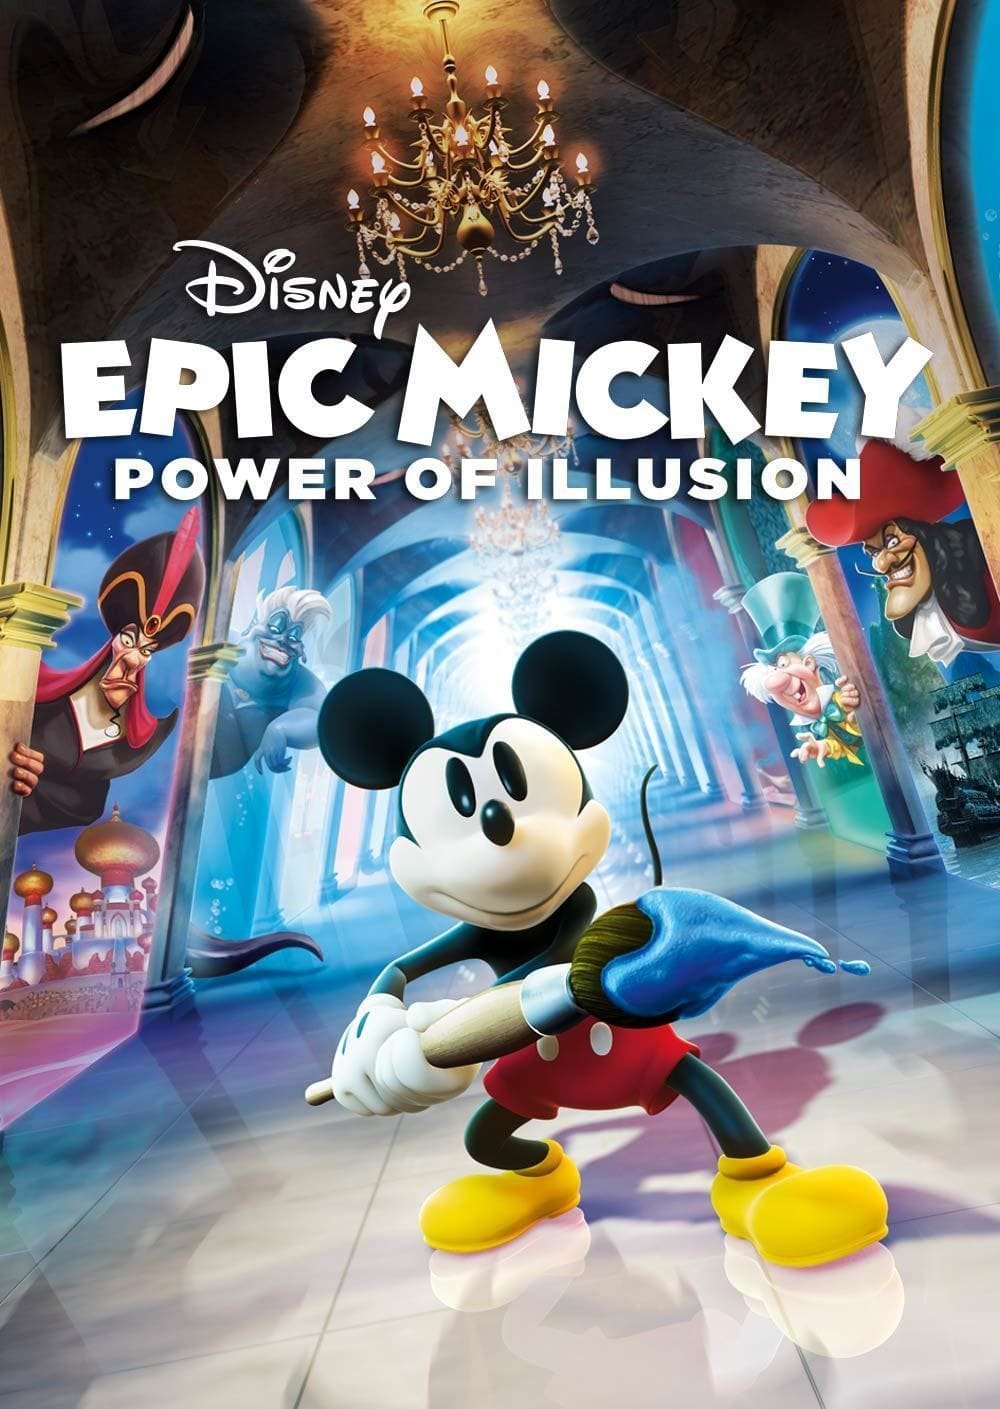 Image of Epic Mickey: Power of Illusion